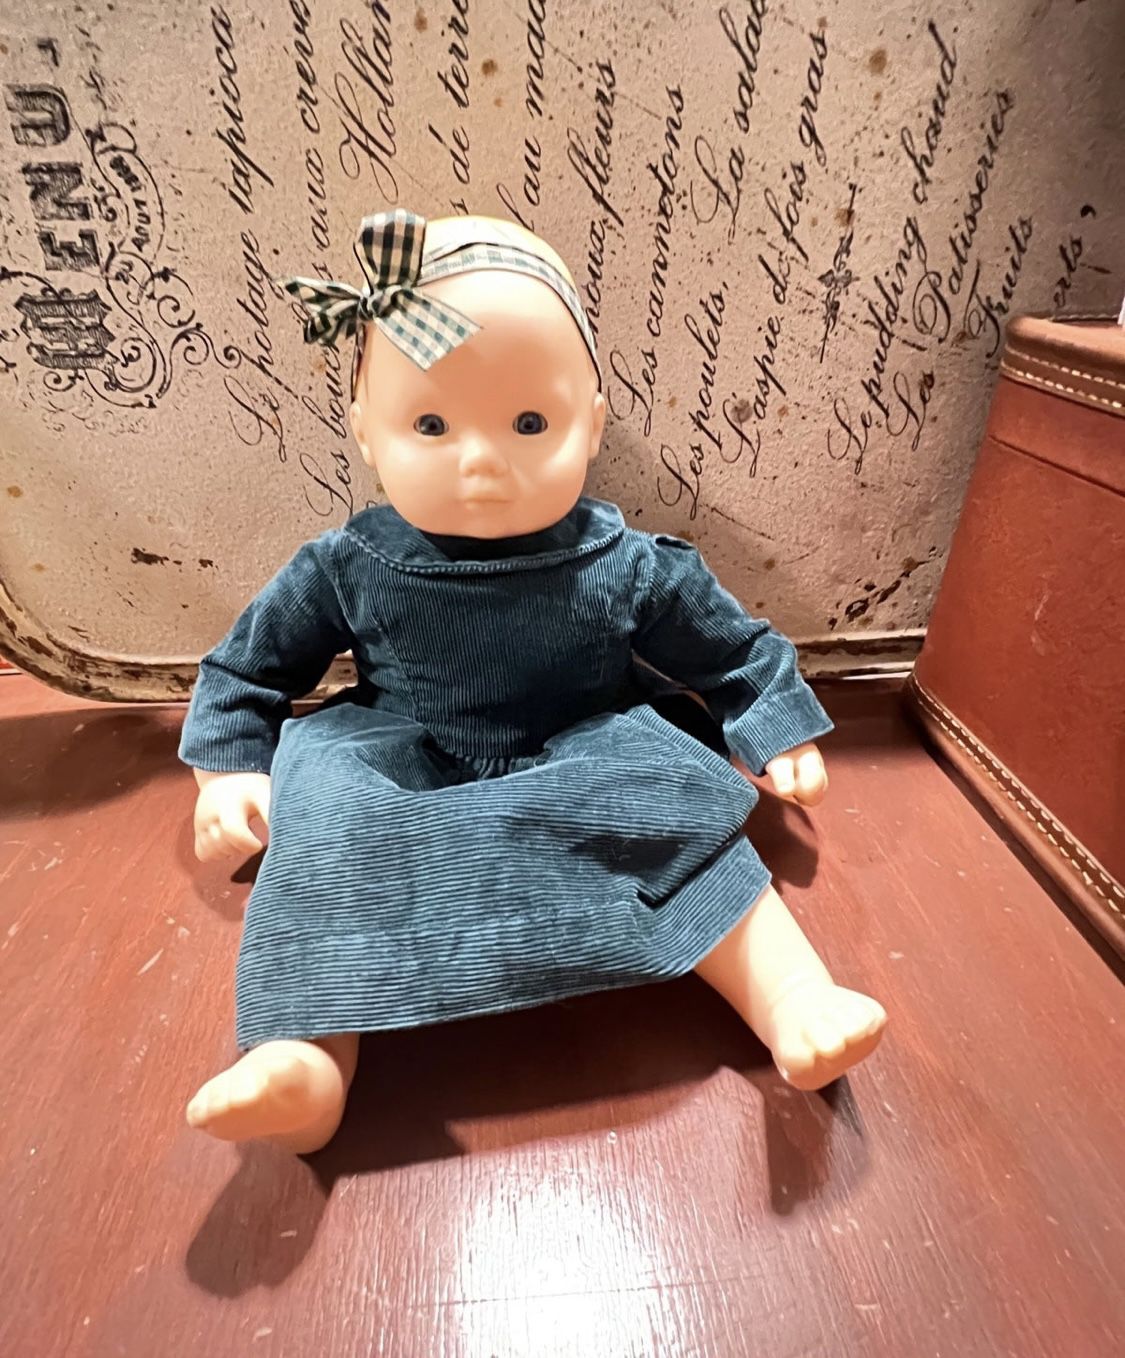 Bitty baby American girl  His head is percussed, fair details in photos